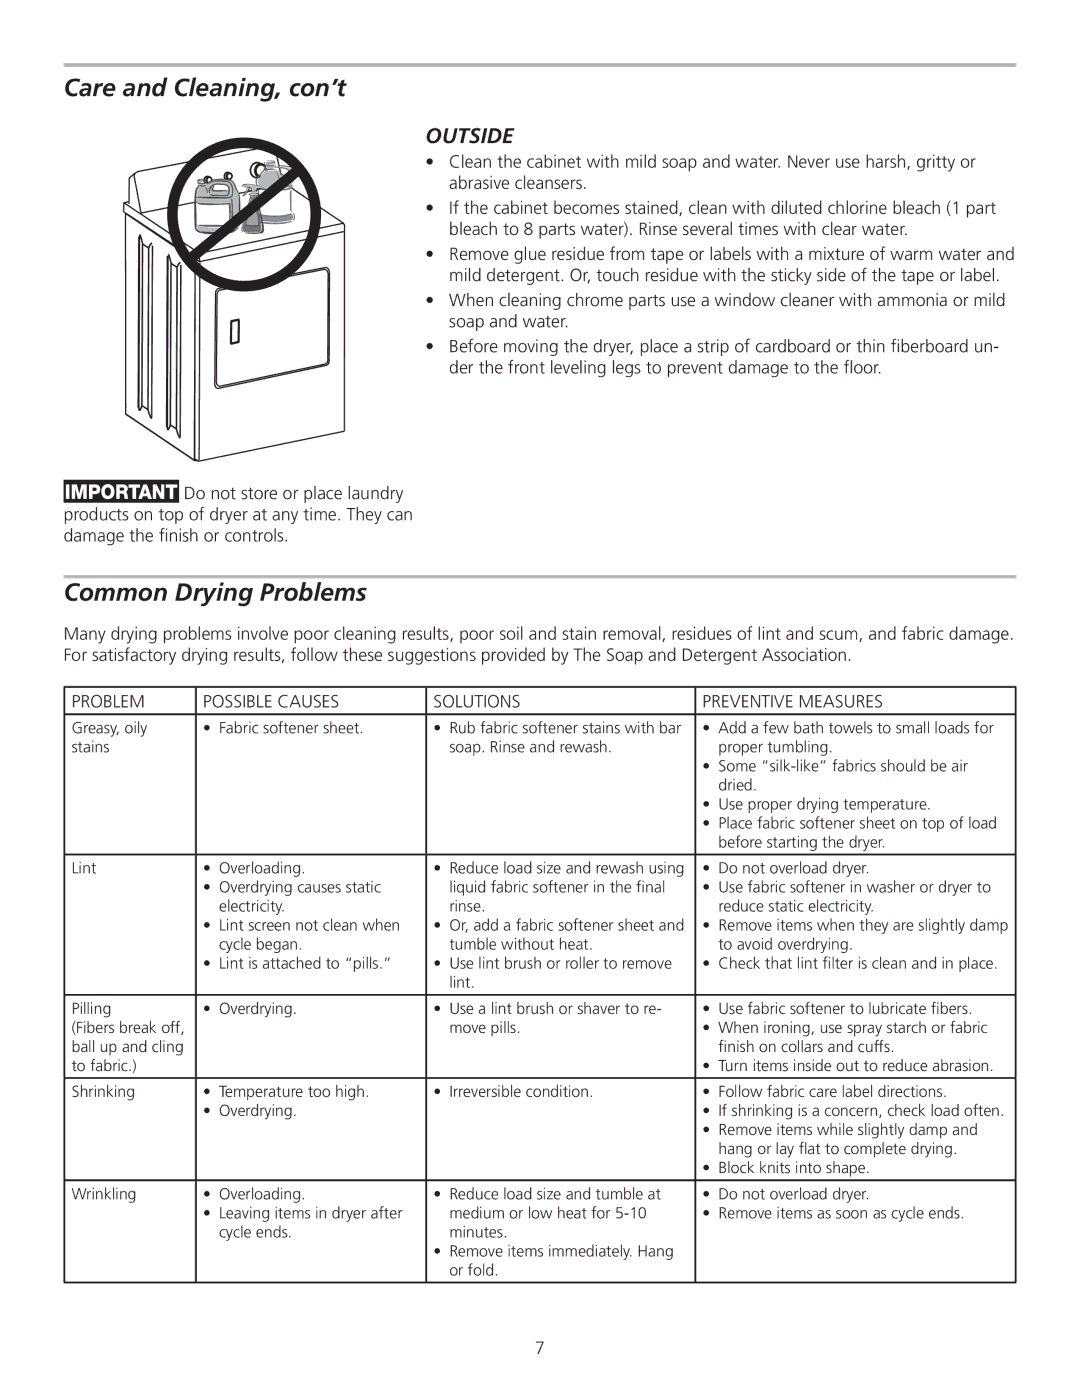 Frigidaire 137153500A manual Care and Cleaning, con’t, Common Drying Problems 